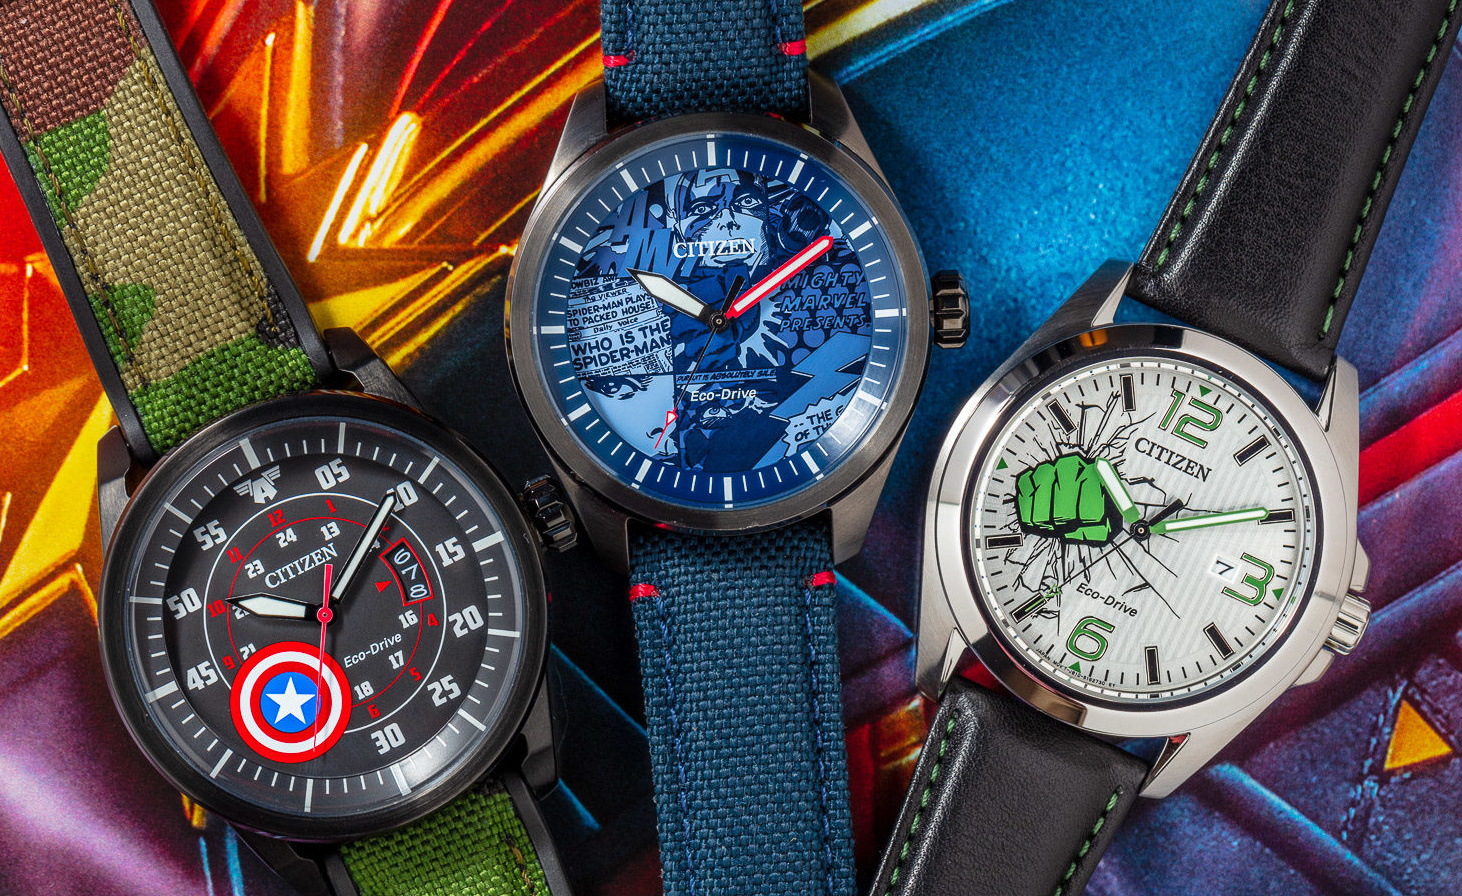 You are currently viewing A Closer Look at Citizen’s Exclusive Disney Superhero Watches